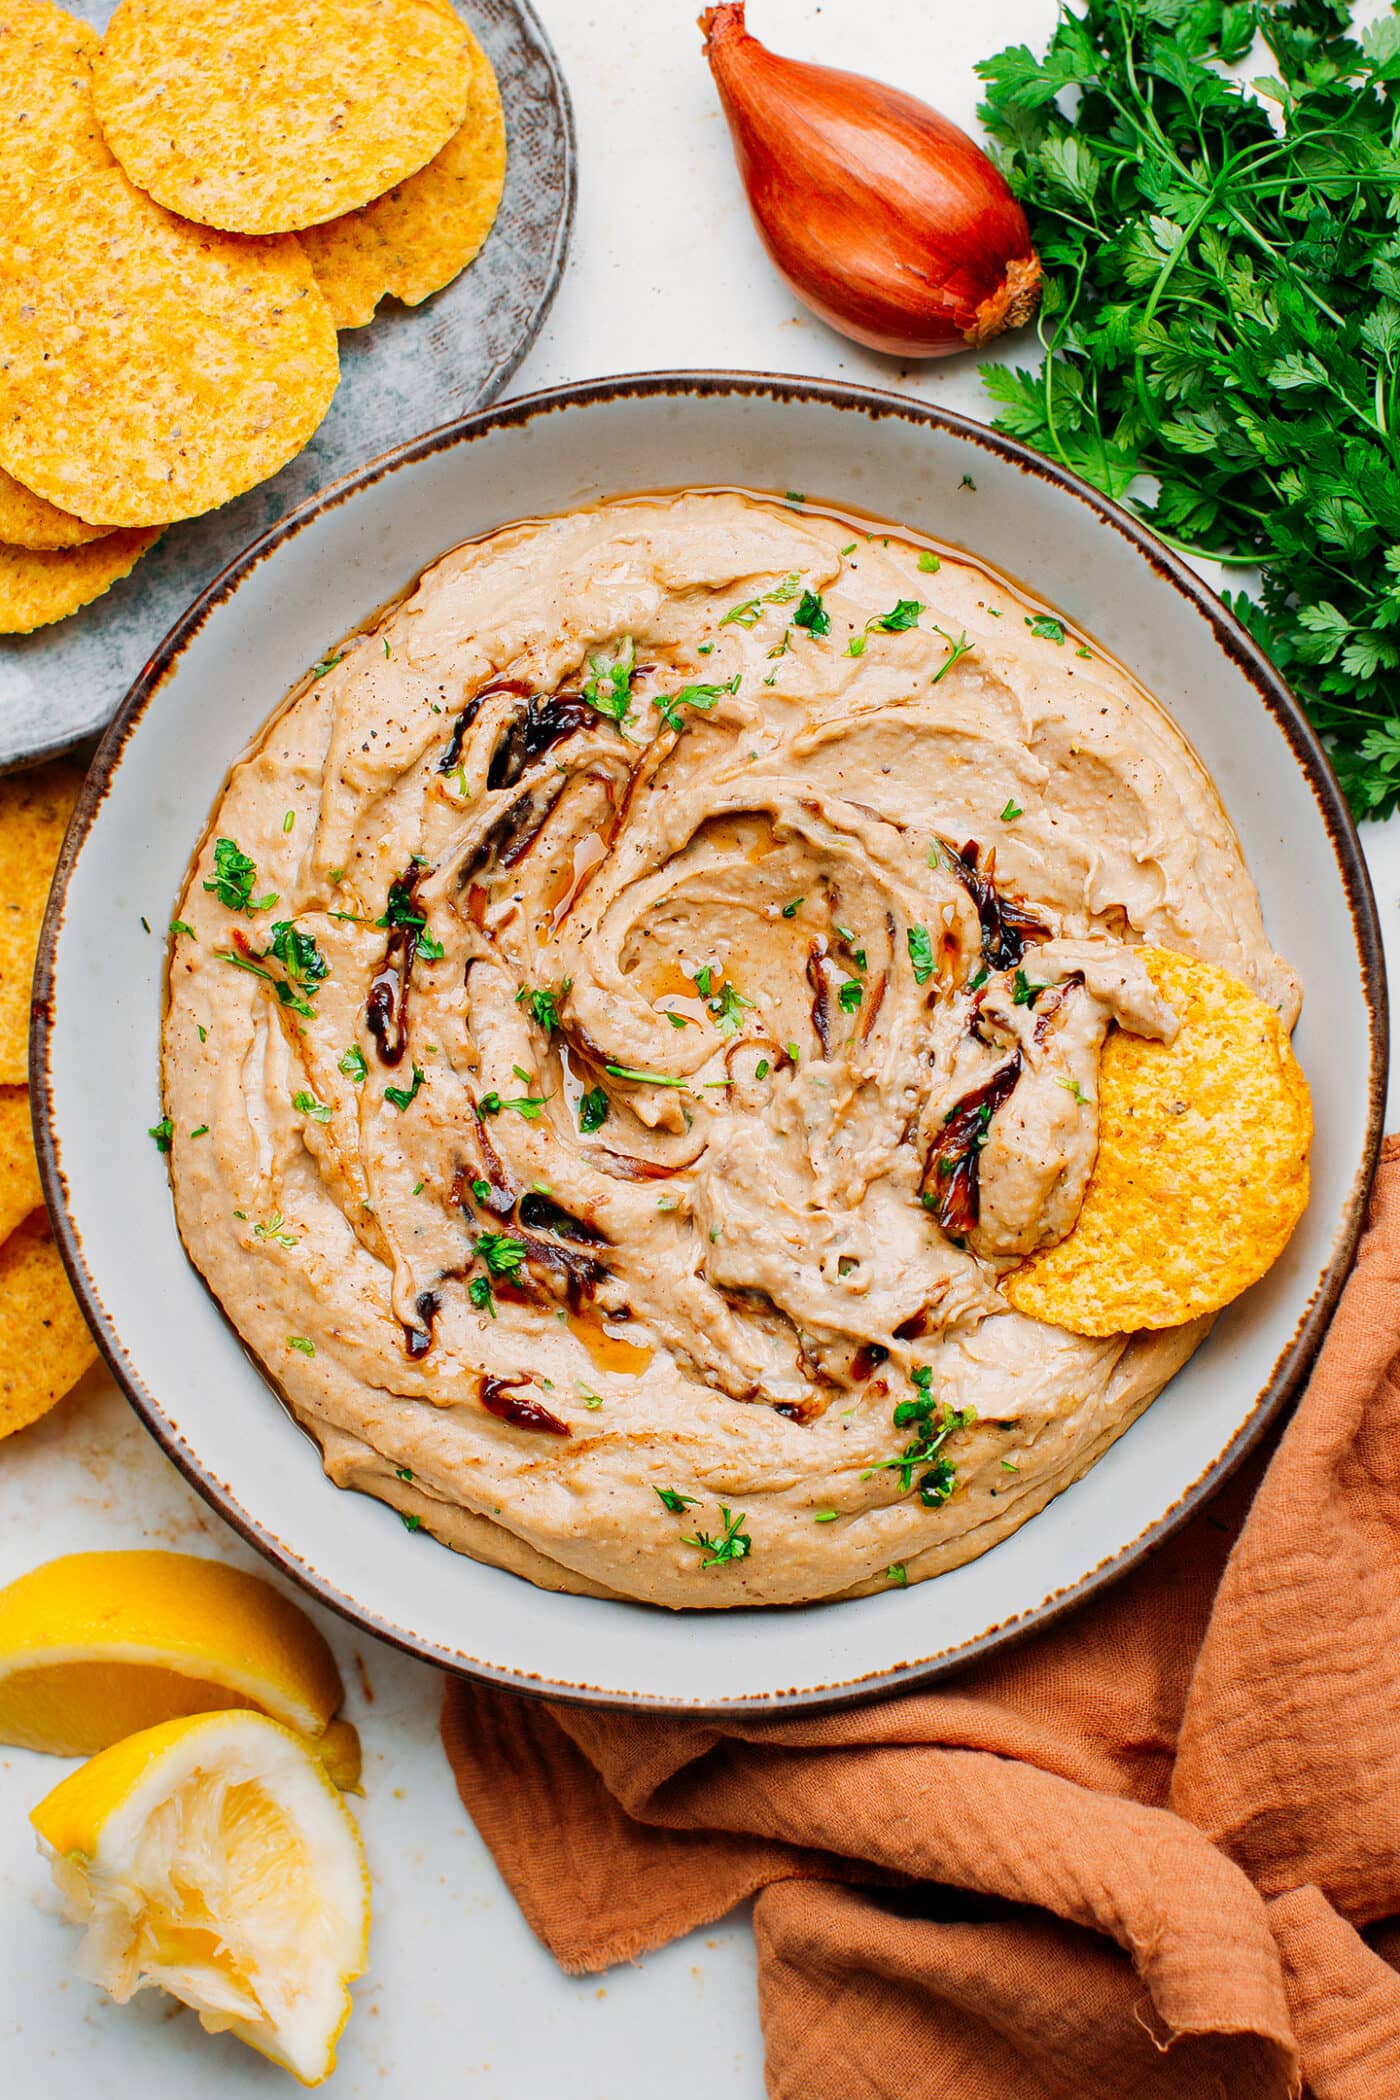 Caramelized shallots hummus in a plate with tortilla chips.